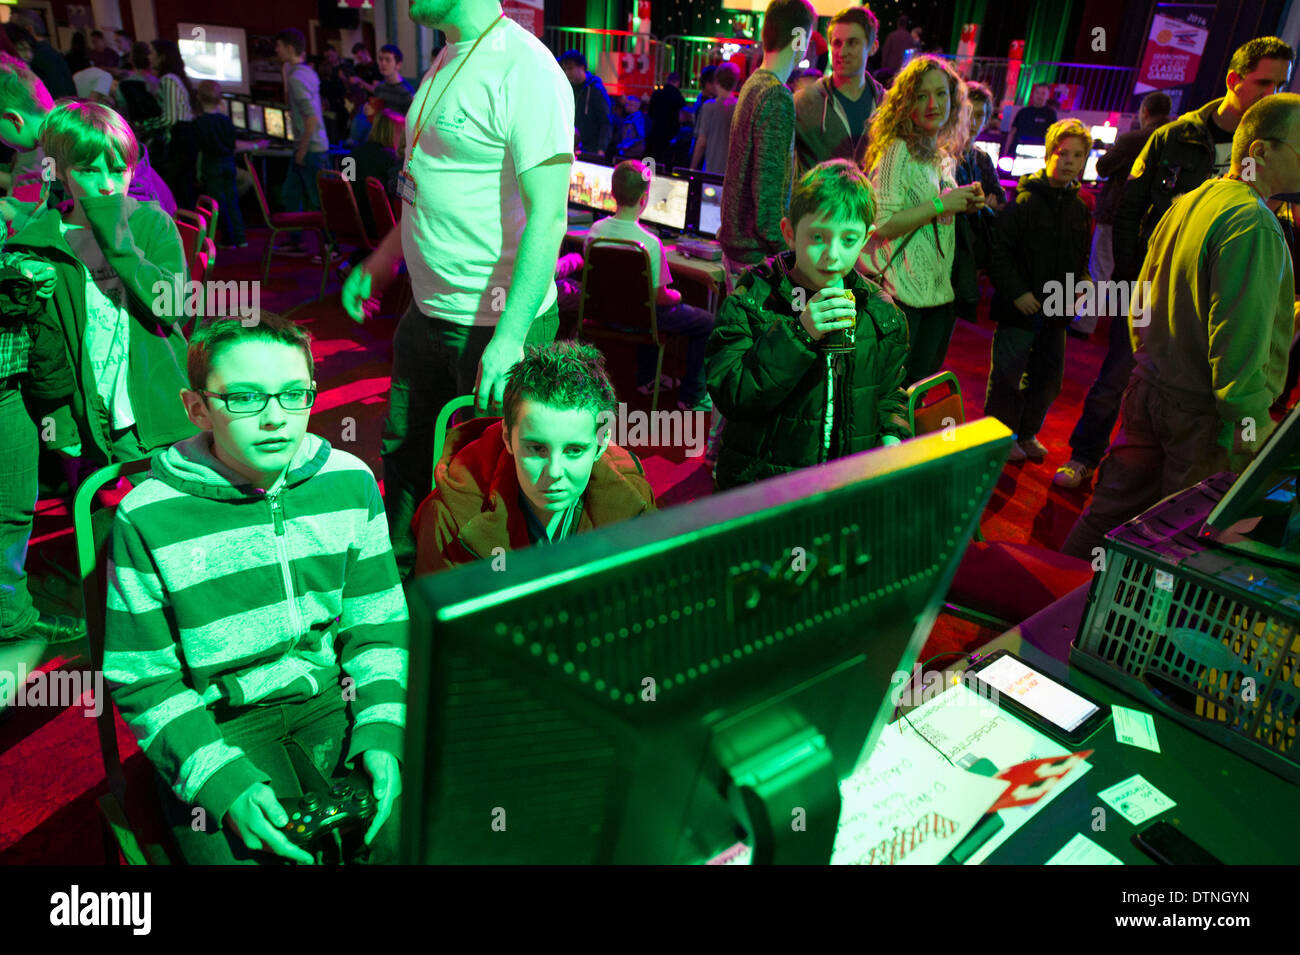 Margate, Kent, UK. 21st February, 2014.  Young gamers concentrating on playing a game at a gaming EXPO in Margate.  Photographer: Gordon Scammell/Alamy Live News Stock Photo